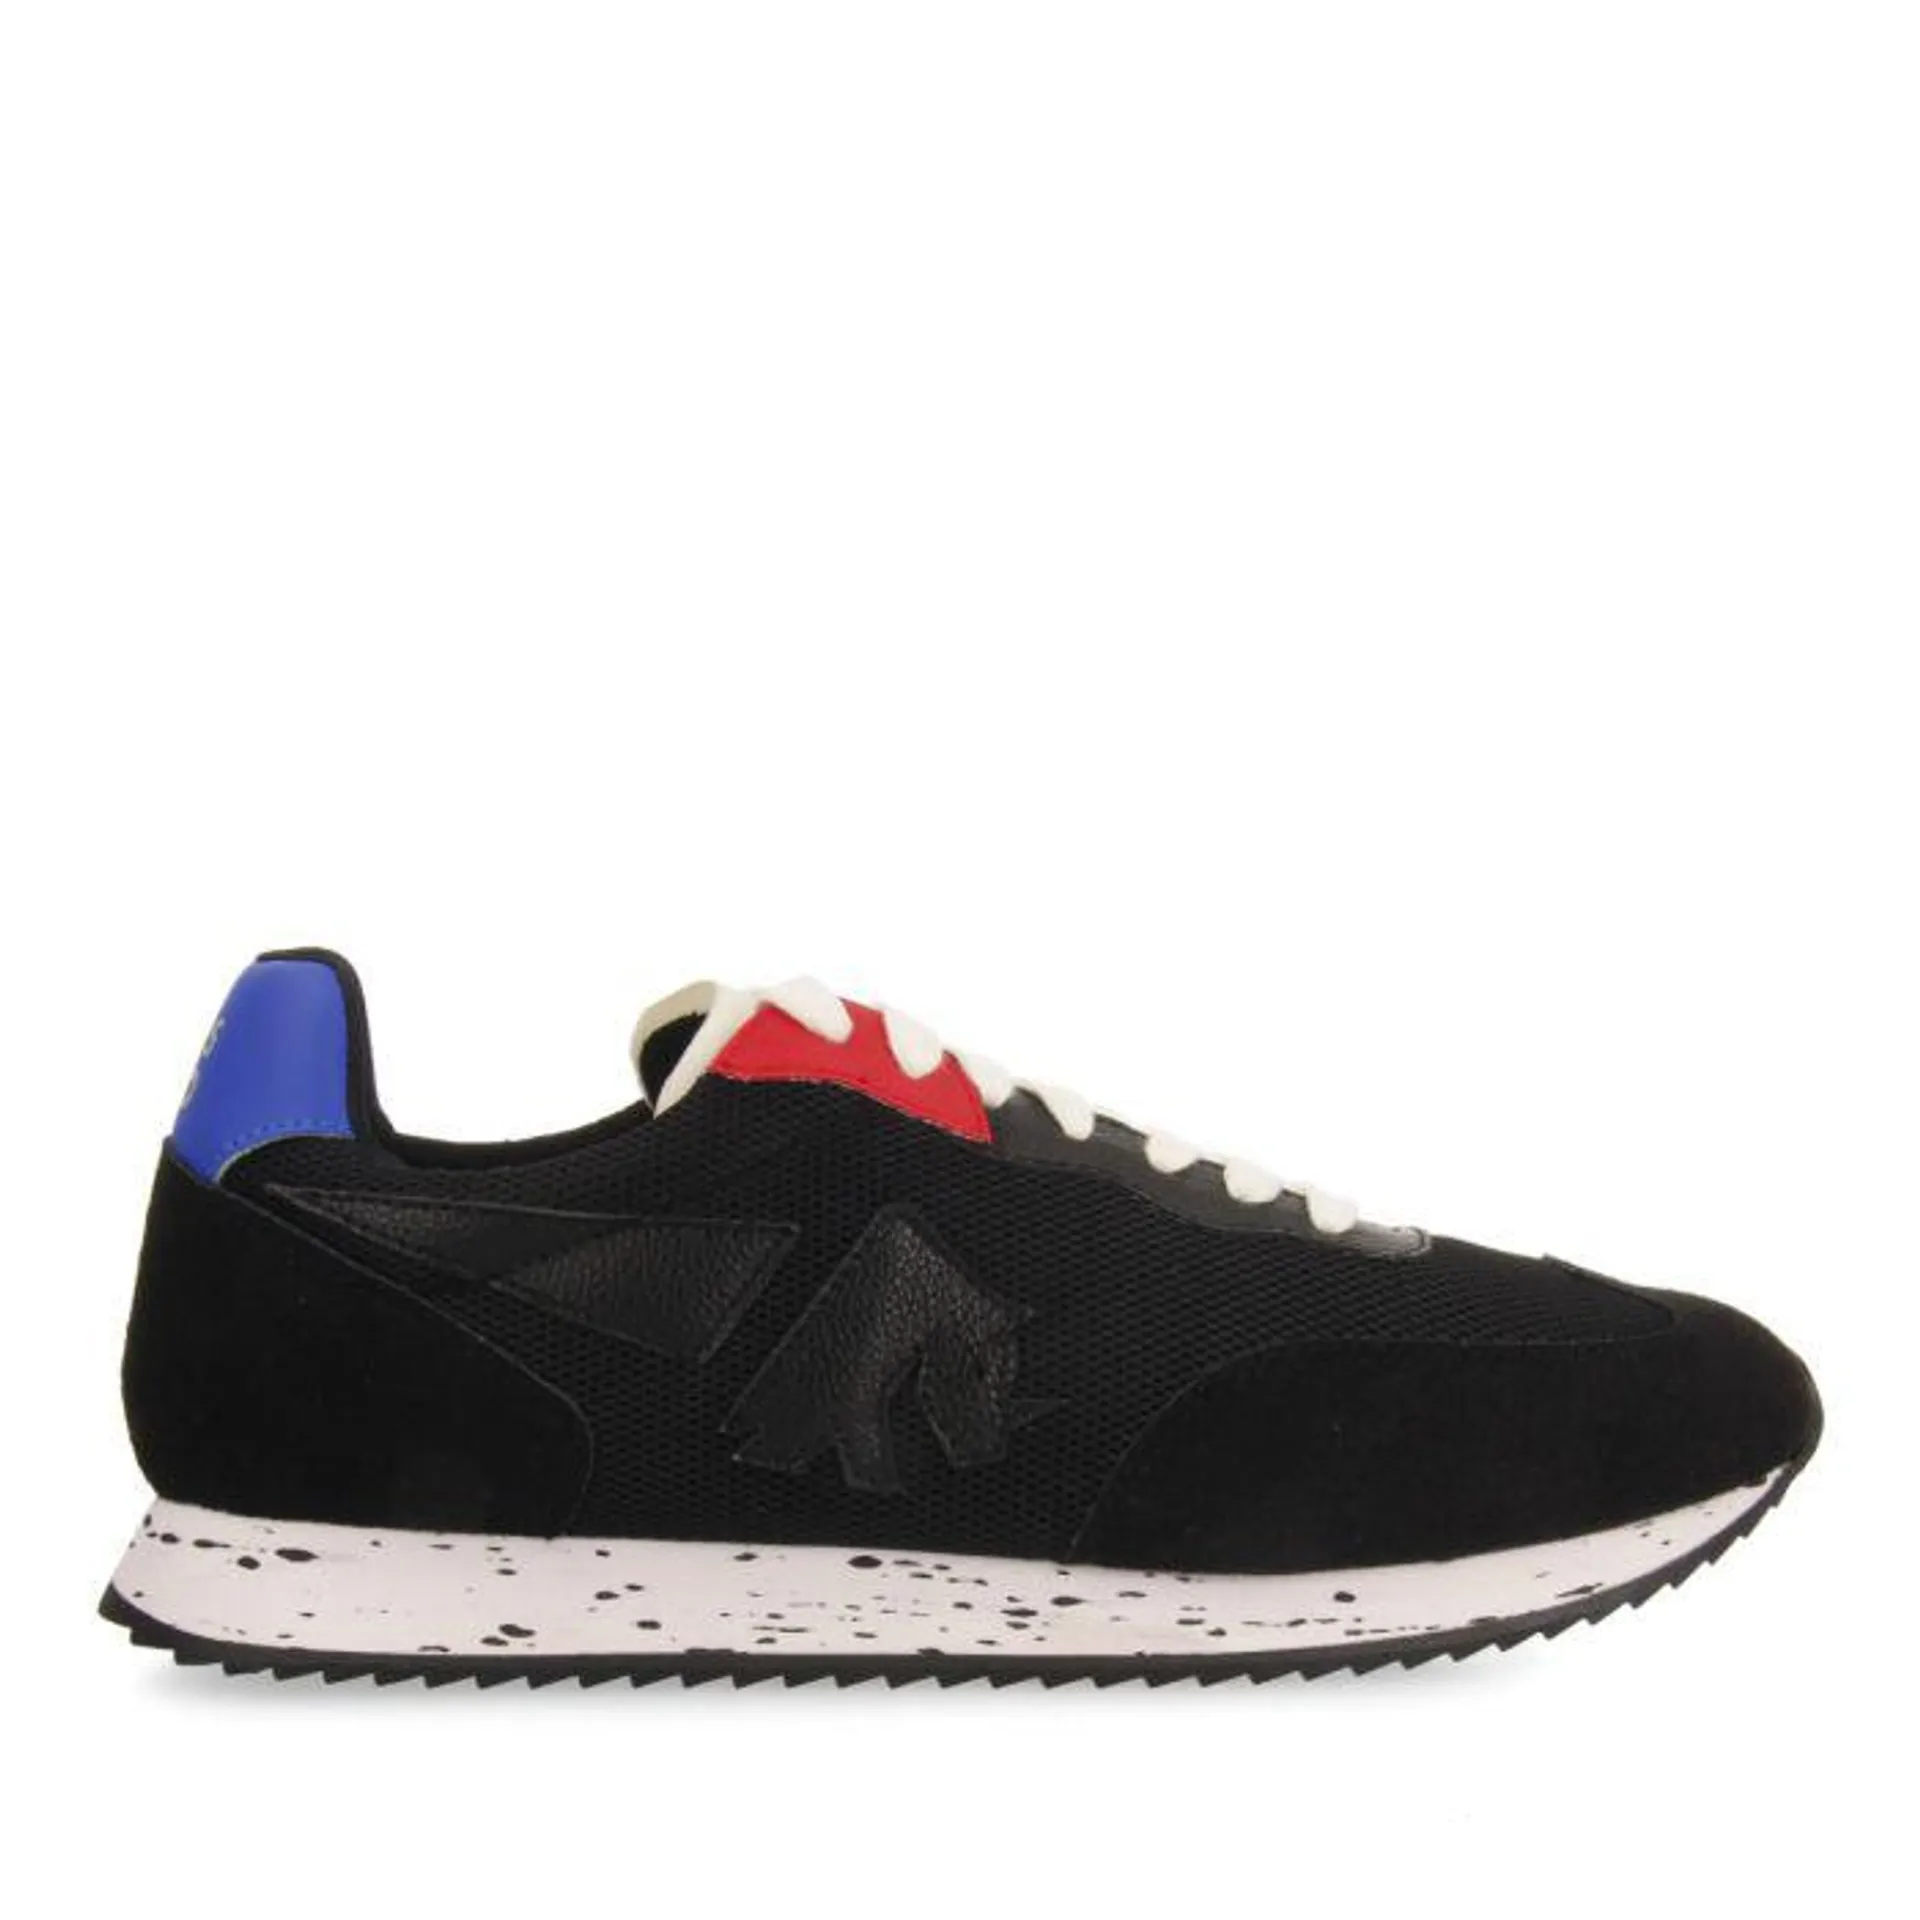 Taurage men's black sneakers with blue and red details